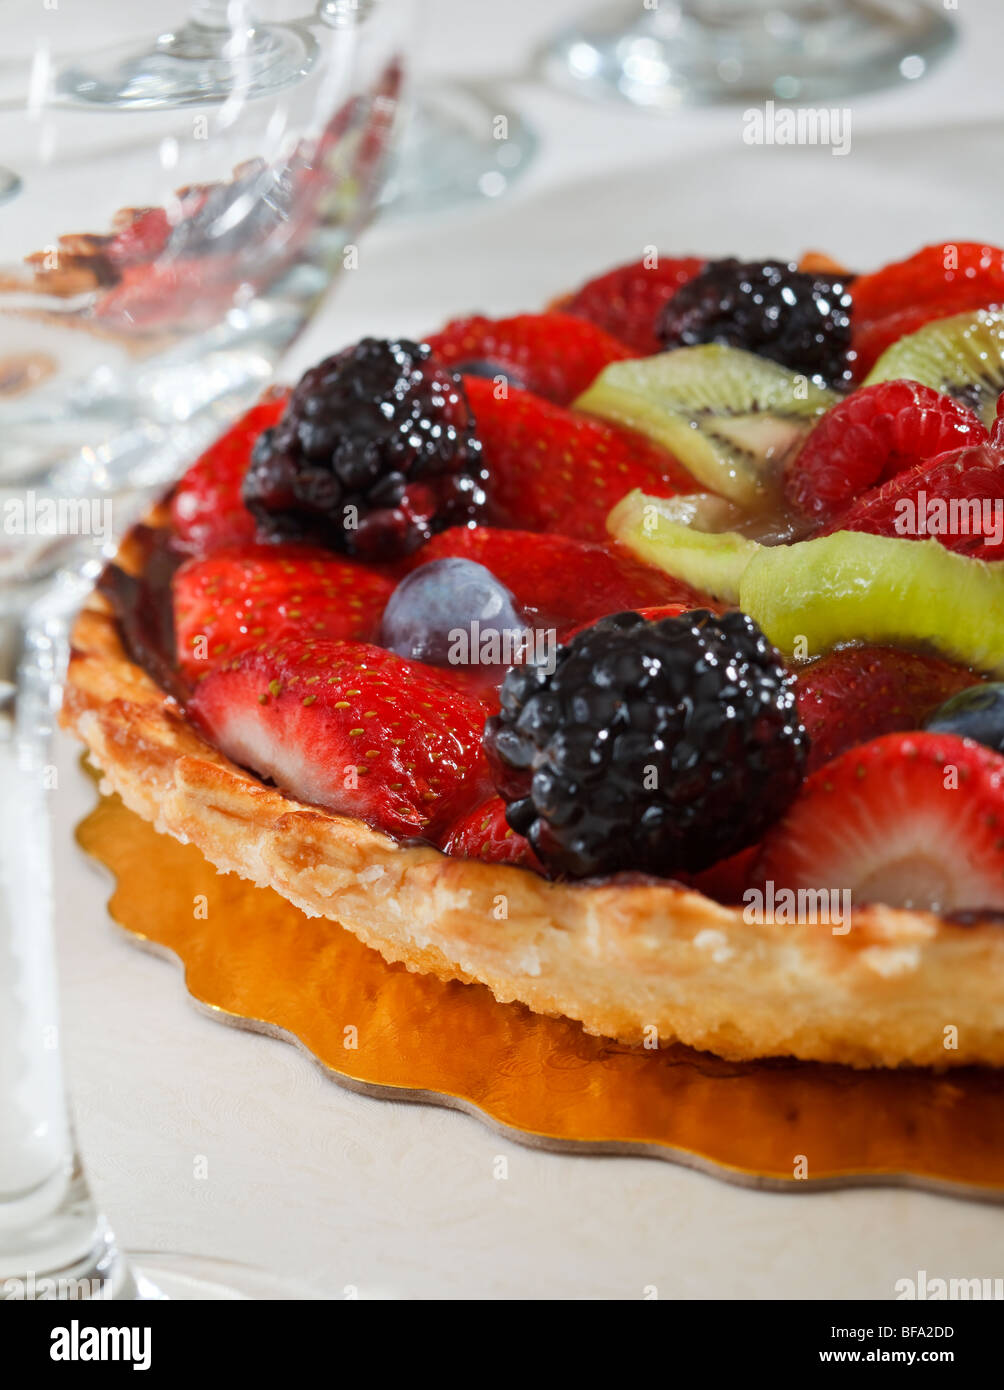 Close up of Fruit Torte with Strawberries, Boysenberries, Kiwi and Grapes. Stock Photo